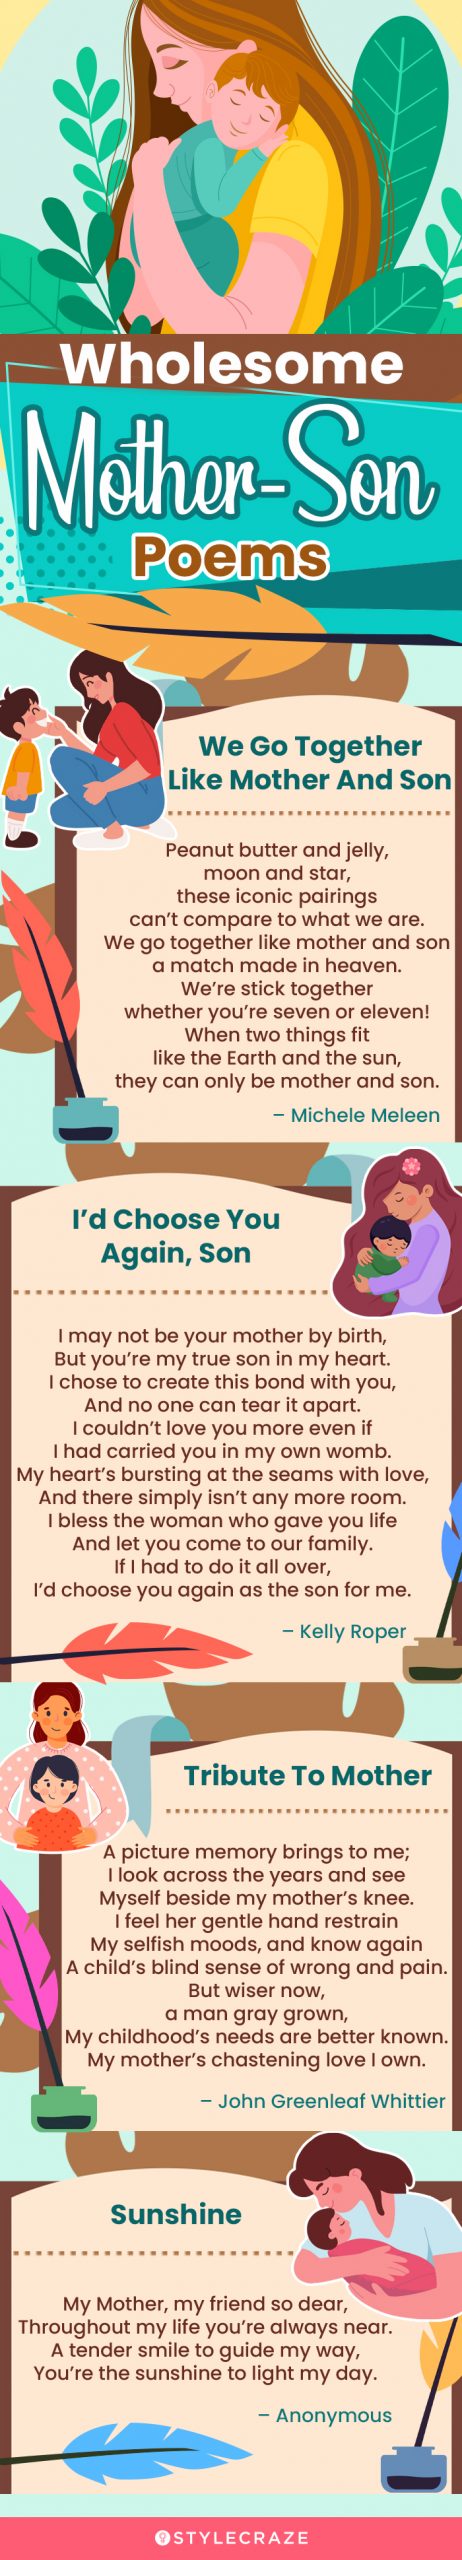 wholesome mother son poems (infographic)